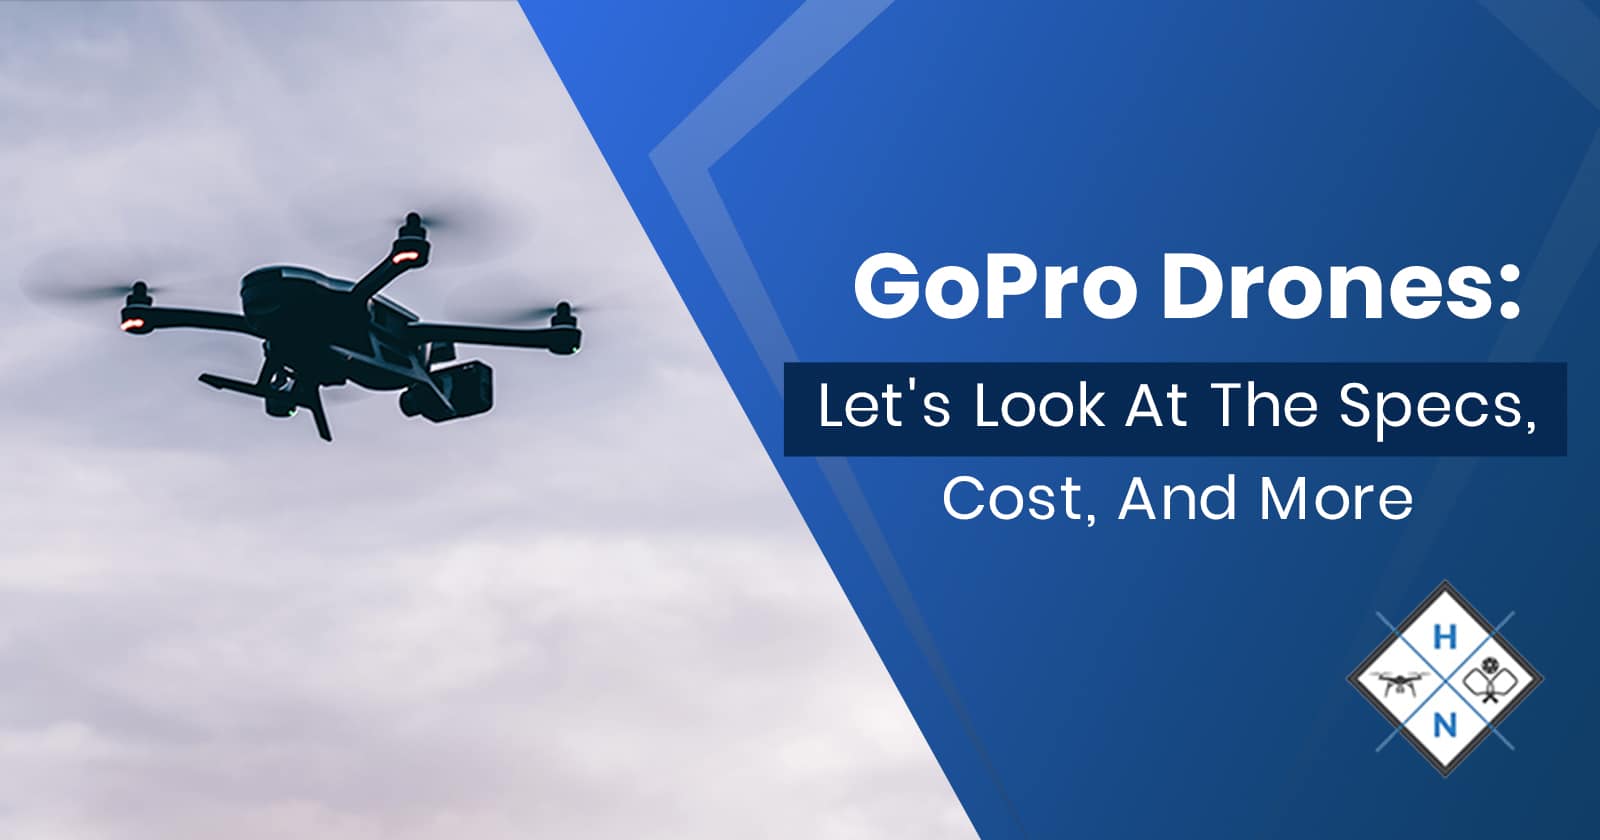 GoPro Drones: Let’s Look At The Specs, Cost, And More